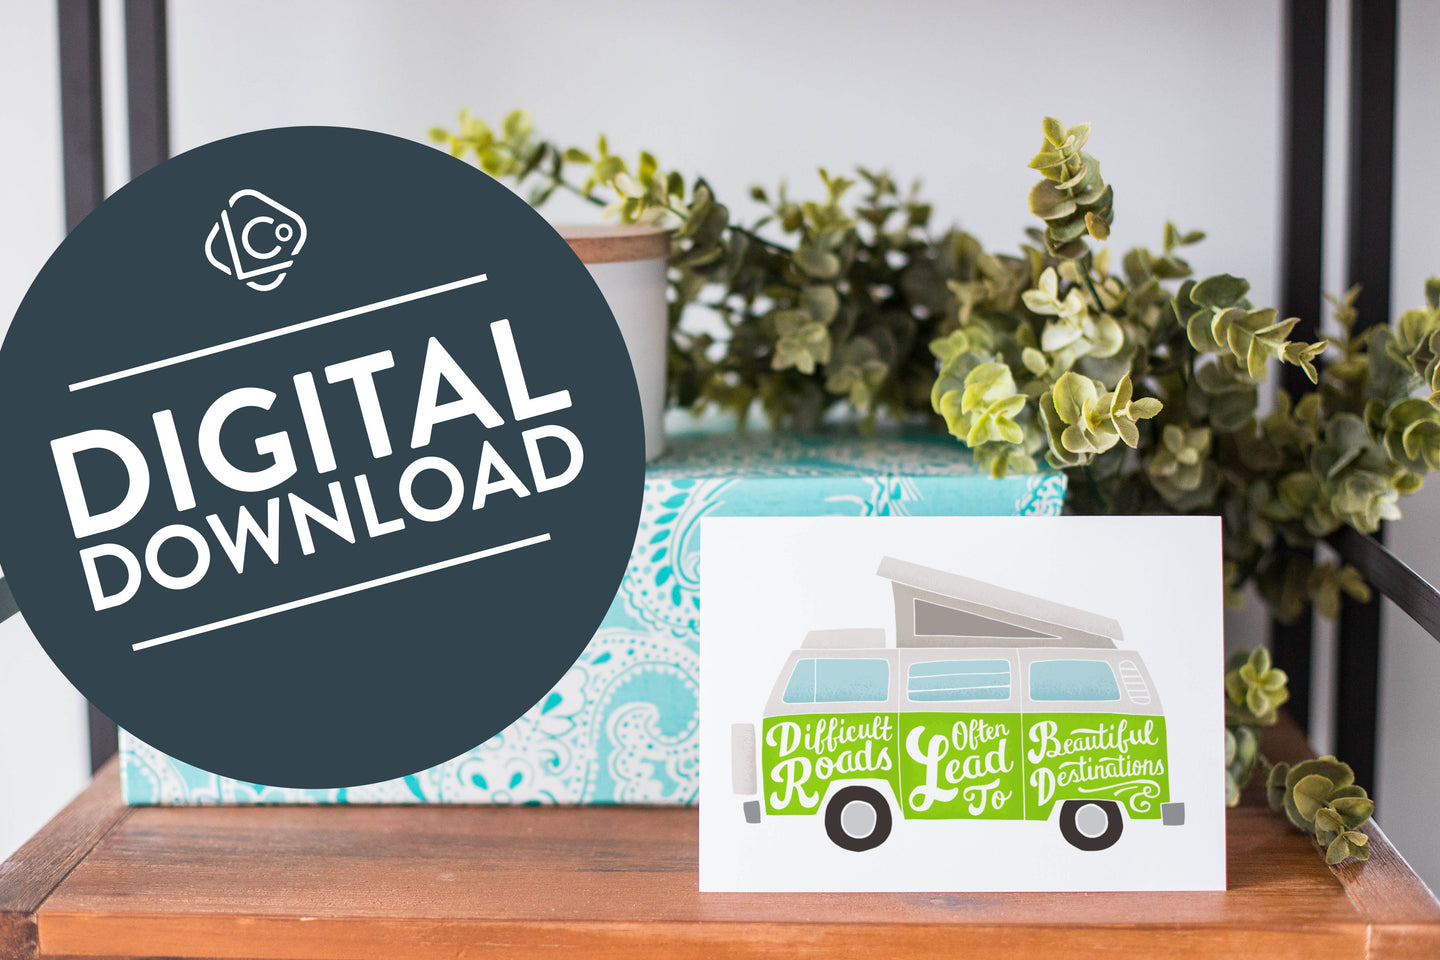 A greeting card is on a table top with a present in blue wrapping paper in the background. On top of the present is a candle and some greenery from a plant too. The card features the words “Difficult roads often lead to beautiful destinations” with an illustrated campervan. The words 